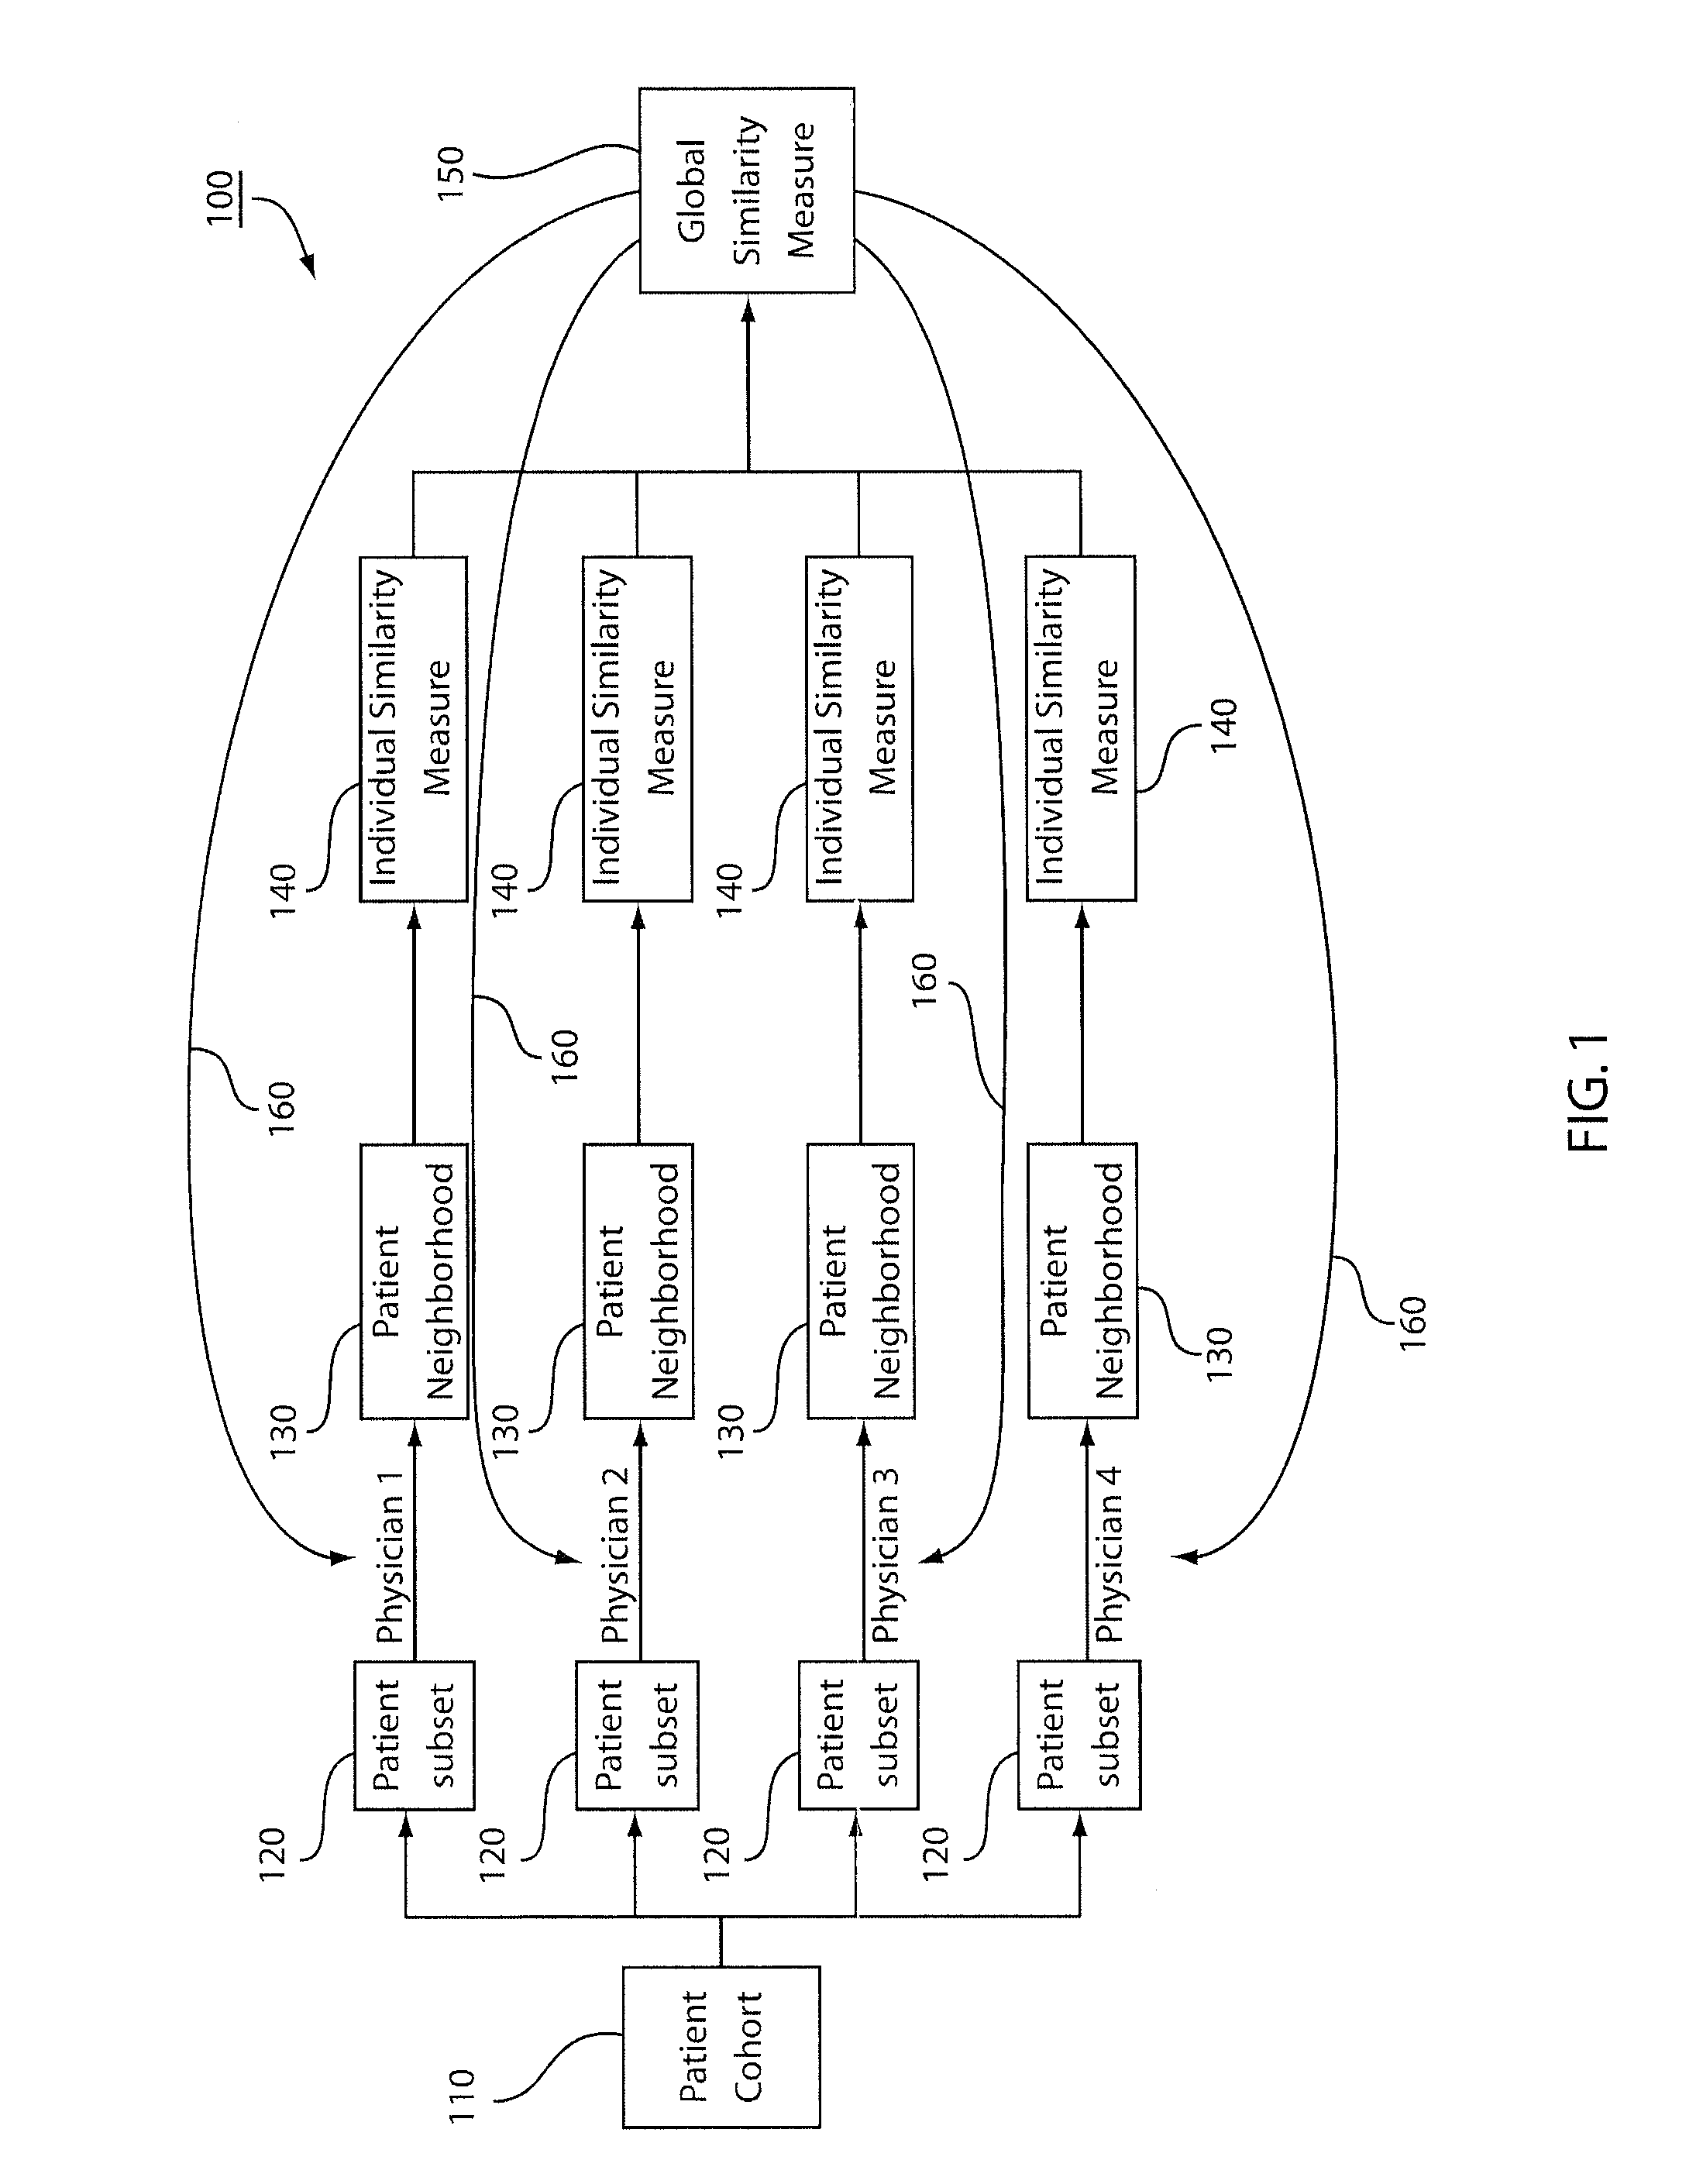 System and method for composite distance metric leveraging multiple expert judgments